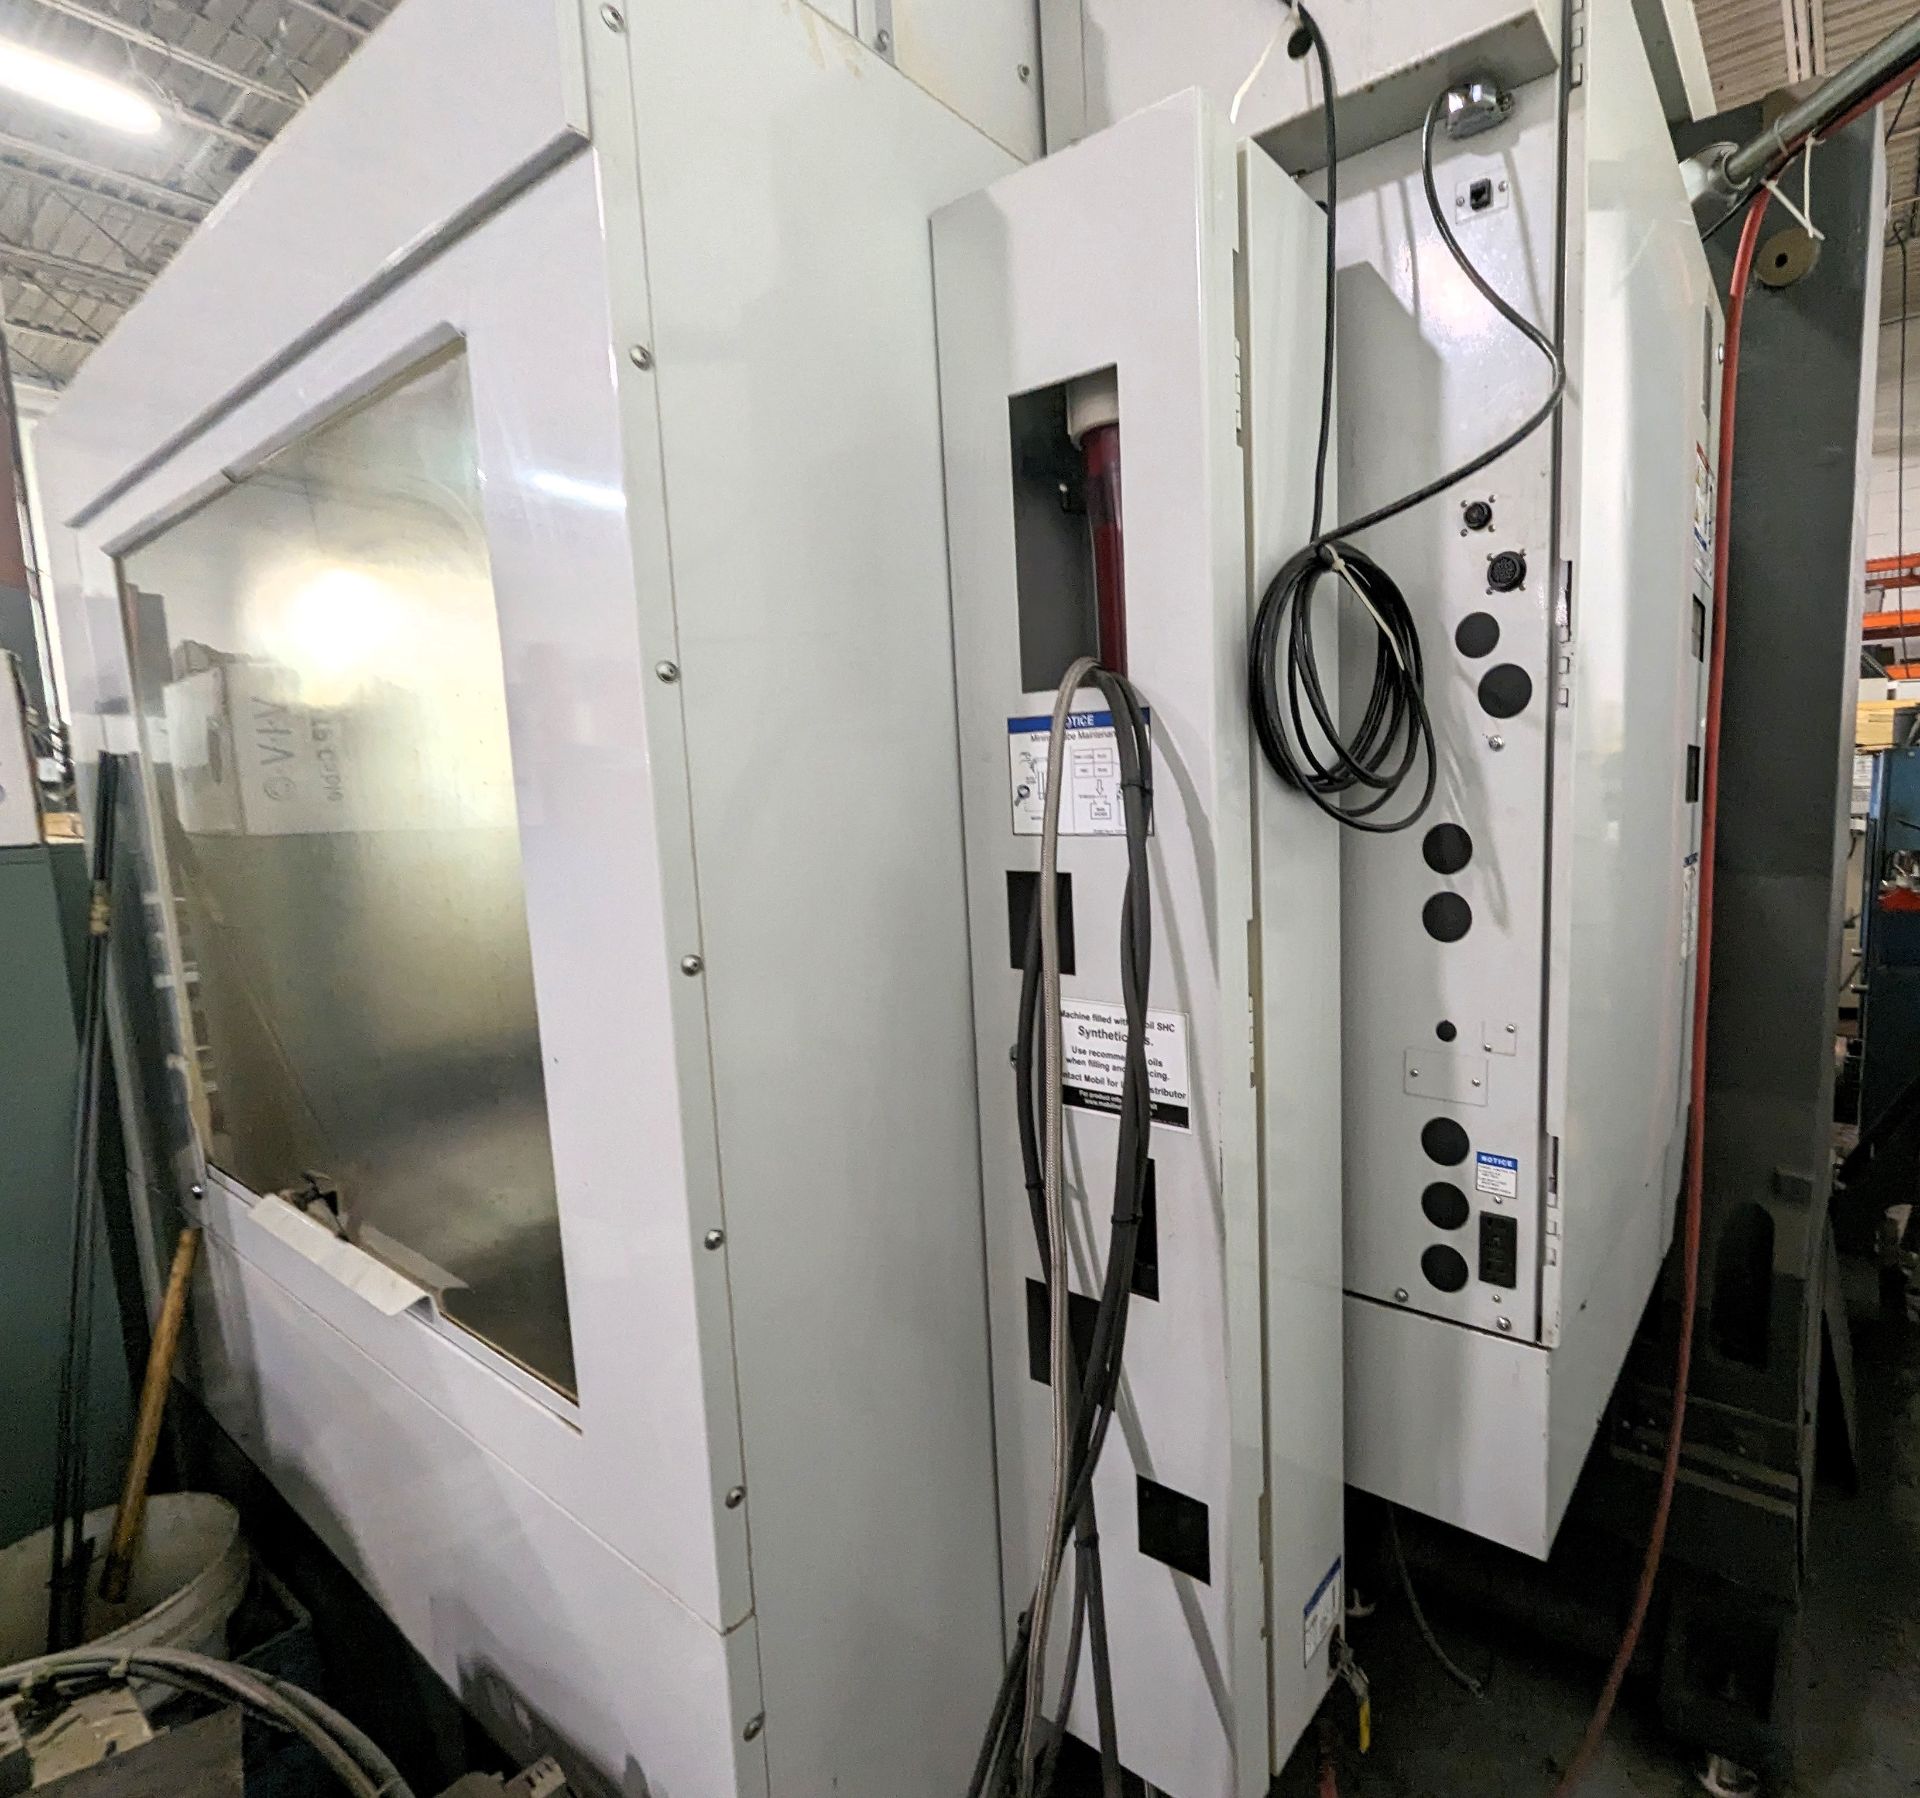 2012 HAAS VF6/40 CNC VERTICAL MACHINING CENTER, CNC CONTROL, 24” X 60” TABLE, 40 TAPER, 10,000 RPM - Image 14 of 17